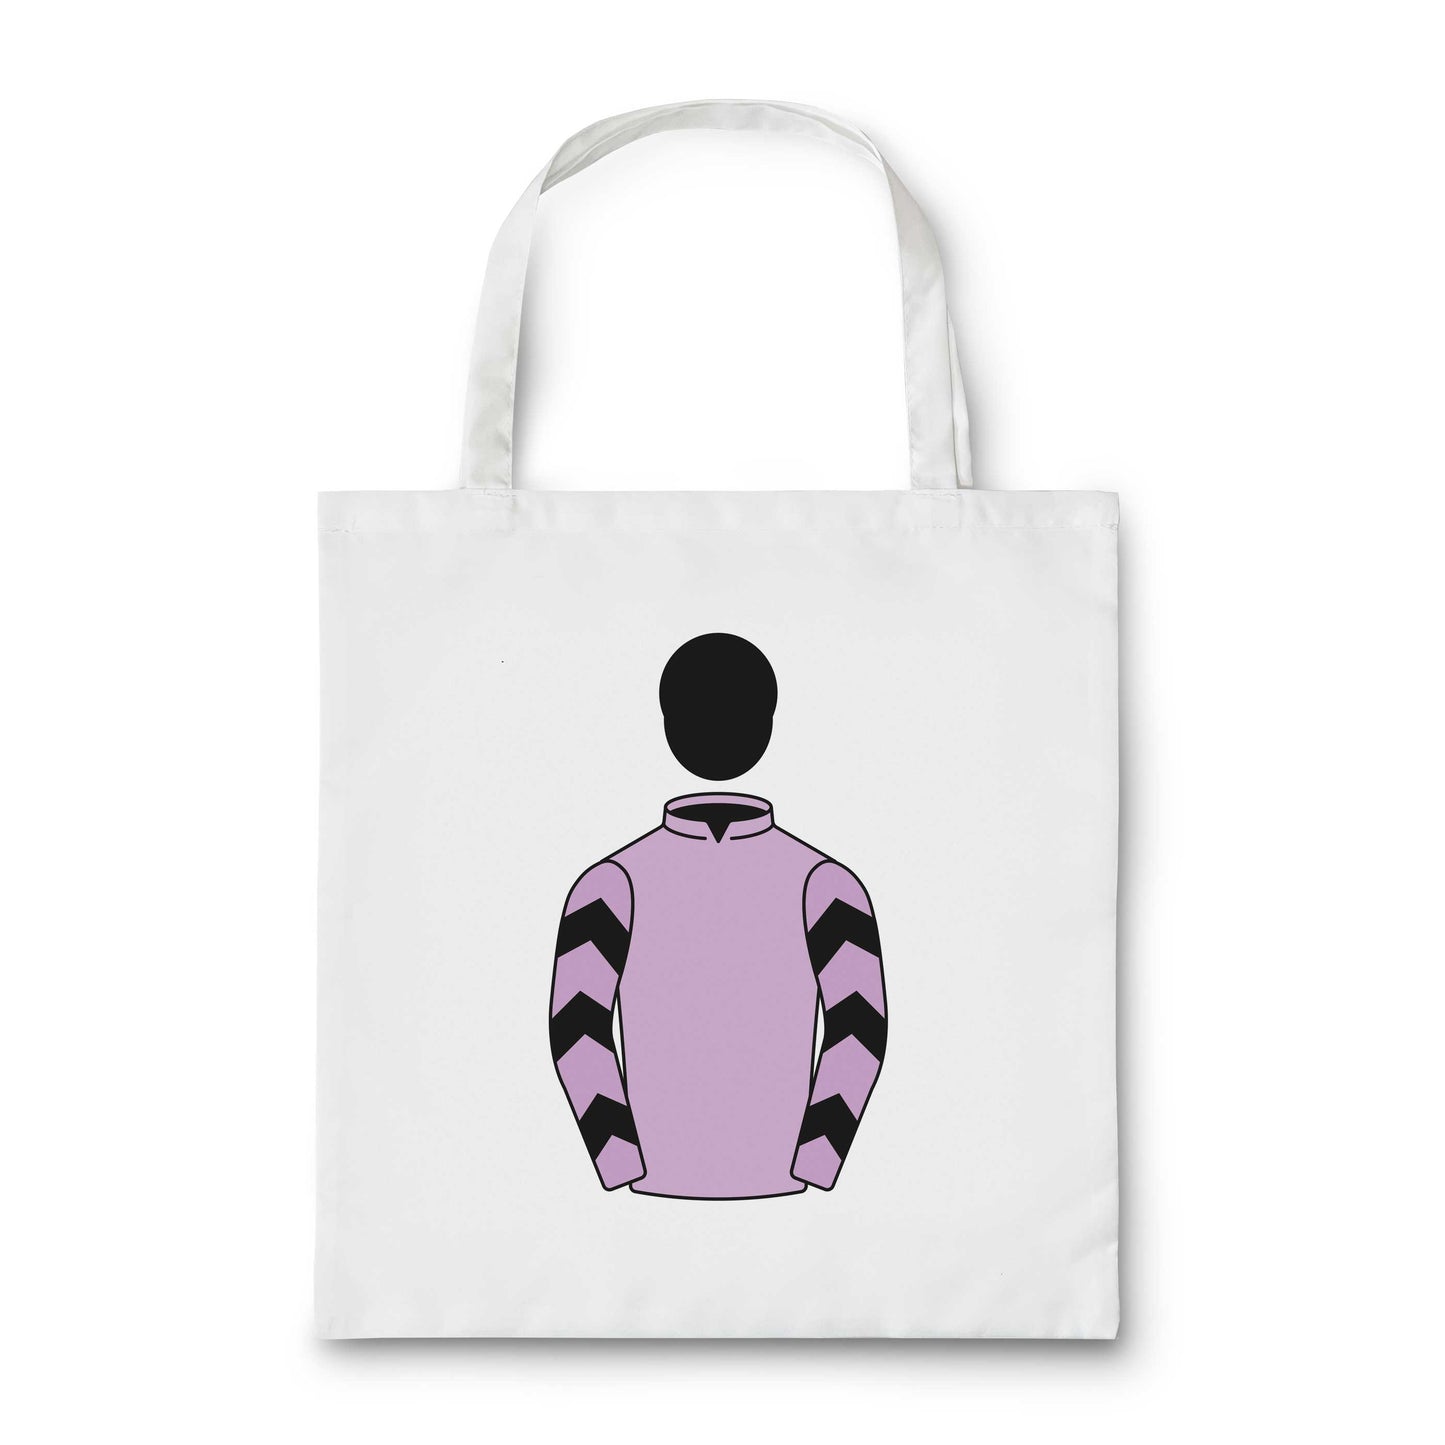 Owners Group Tote Bag - Tote Bag - Hacked Up